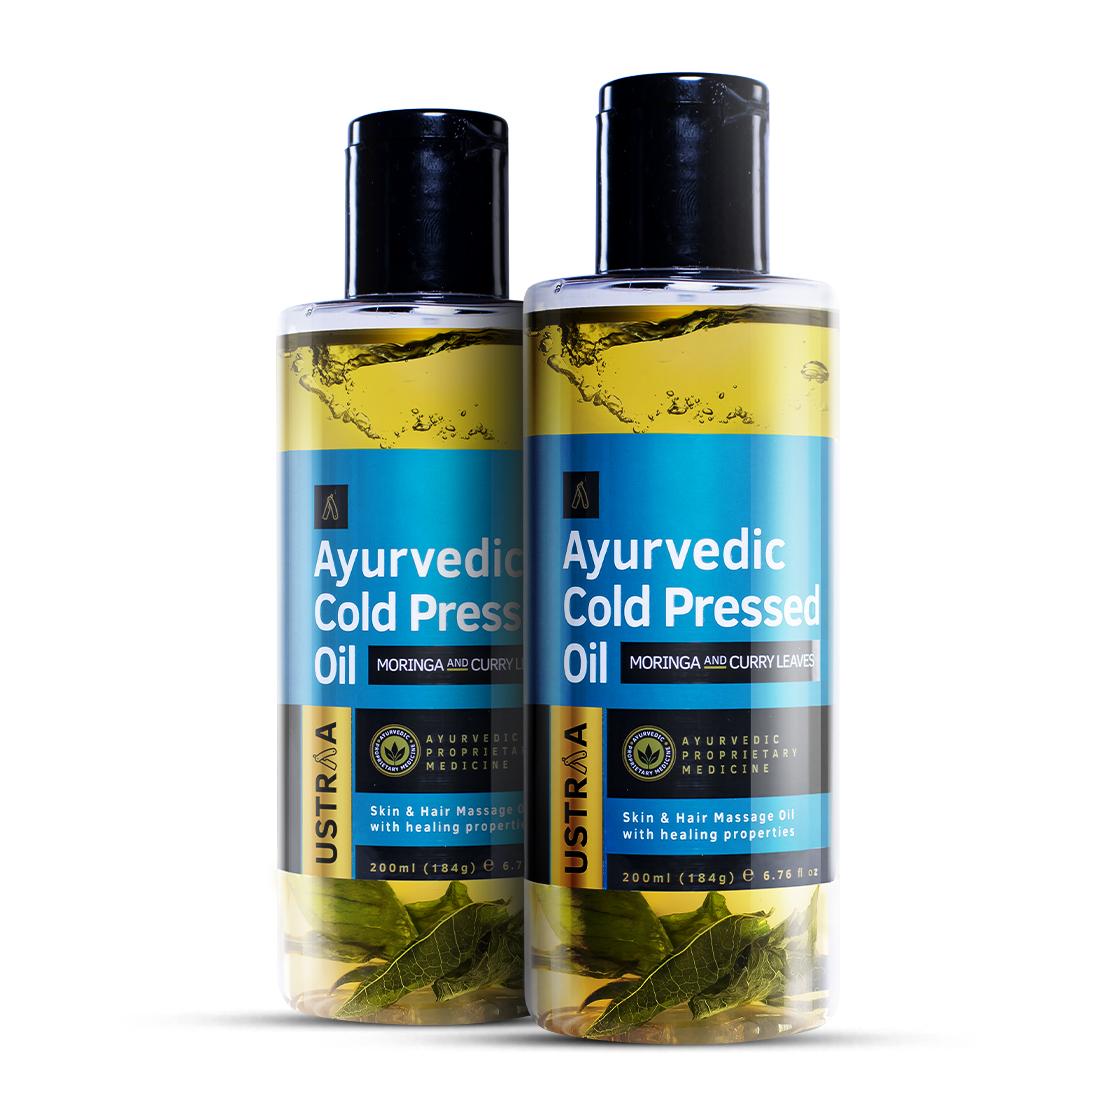 Ayurvedic Cold Pressed Oil with Moringa Oil & Curry Leaves - set of 2